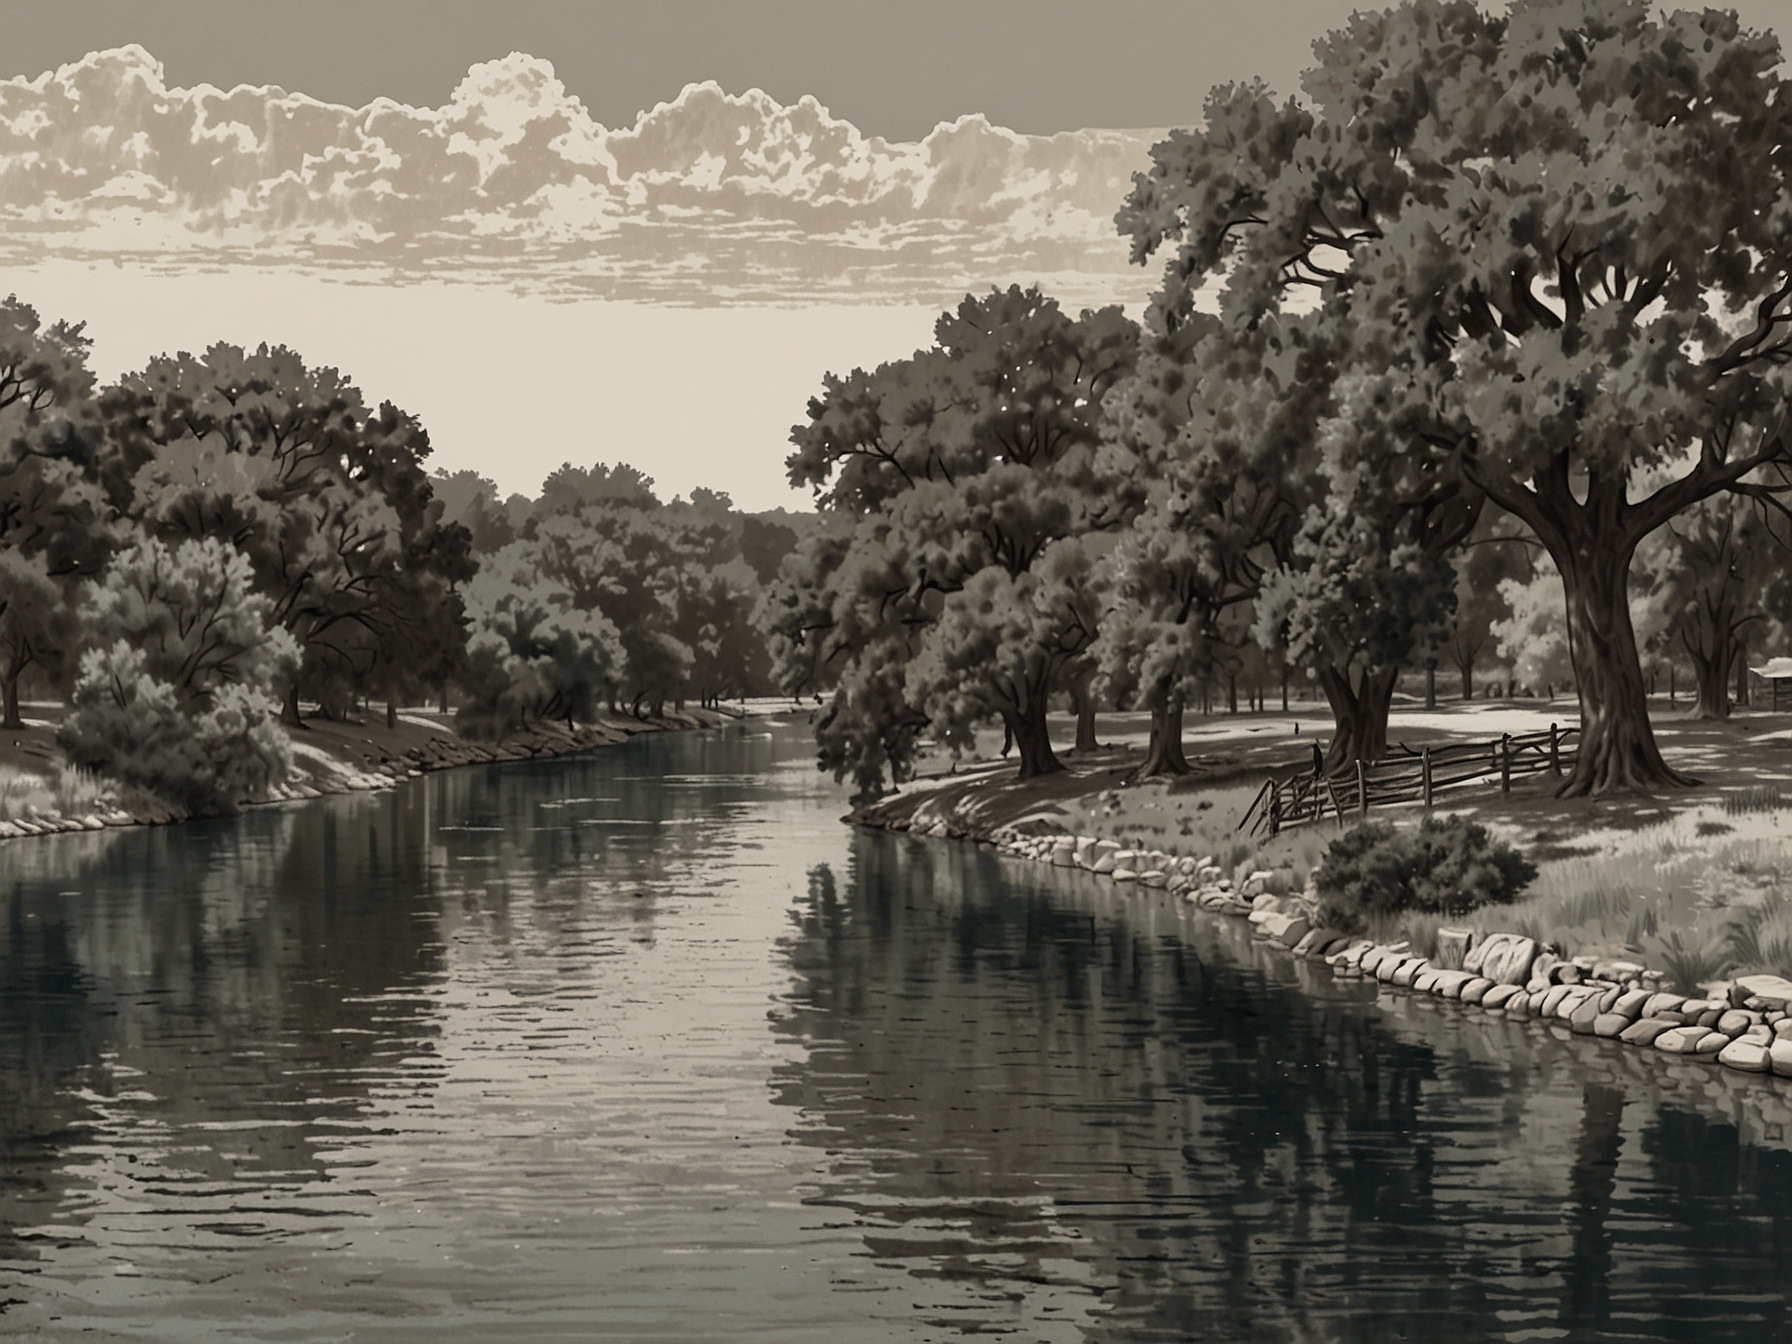 A scenic view of the San Marcos River, showcasing the natural beauty of the city which serves as the backdrop for the Texas Pecan Growers Association's annual event.